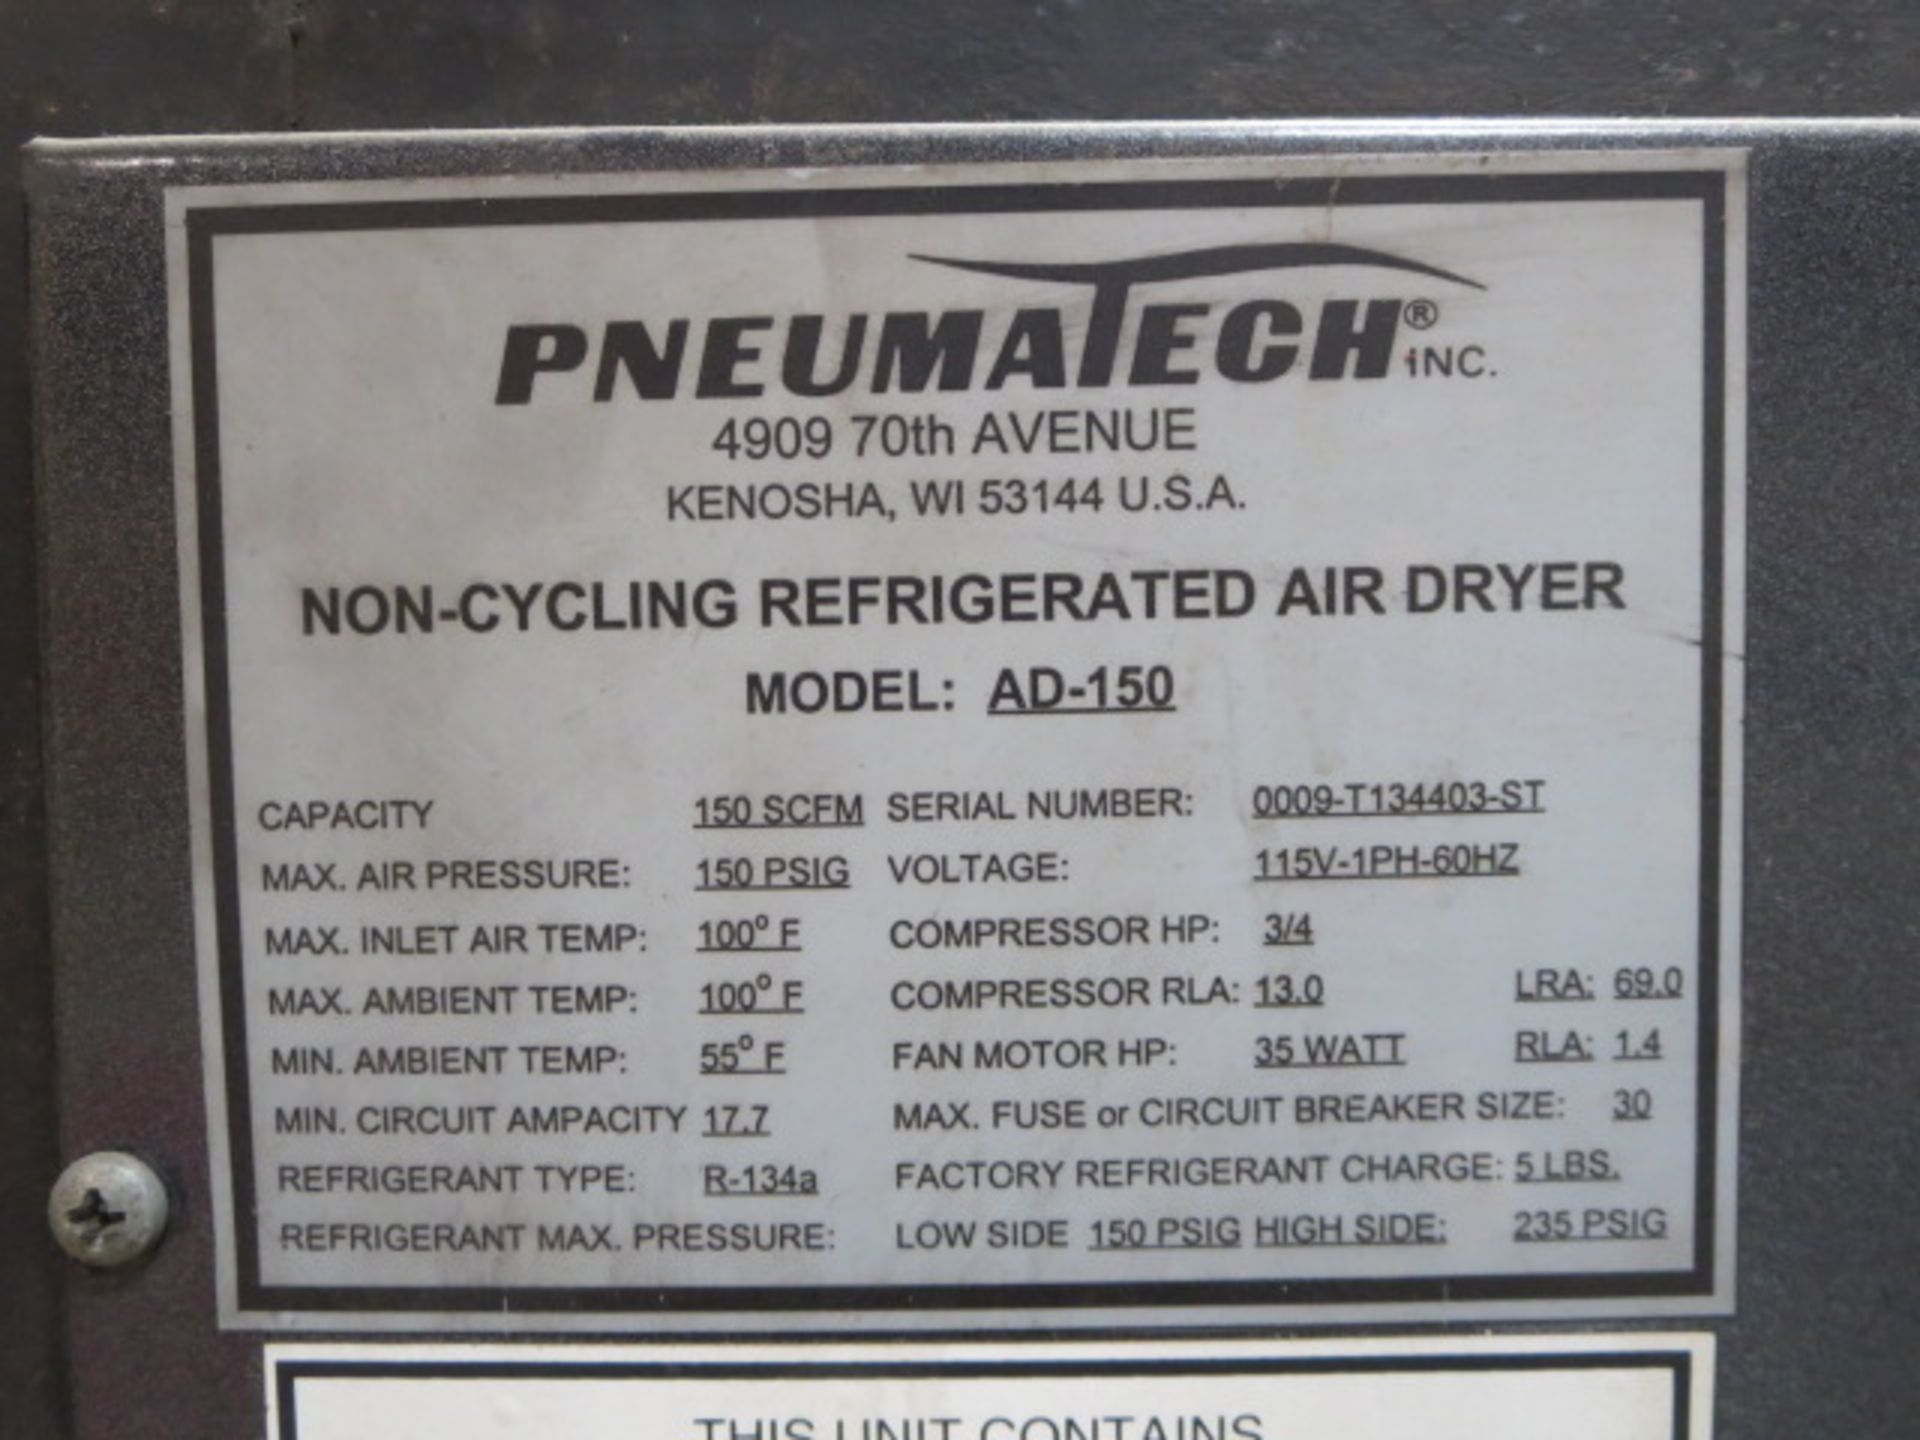 Pneumatech Non-Cycling Refrigerated Air Dryer, model AD-150 - Image 3 of 3